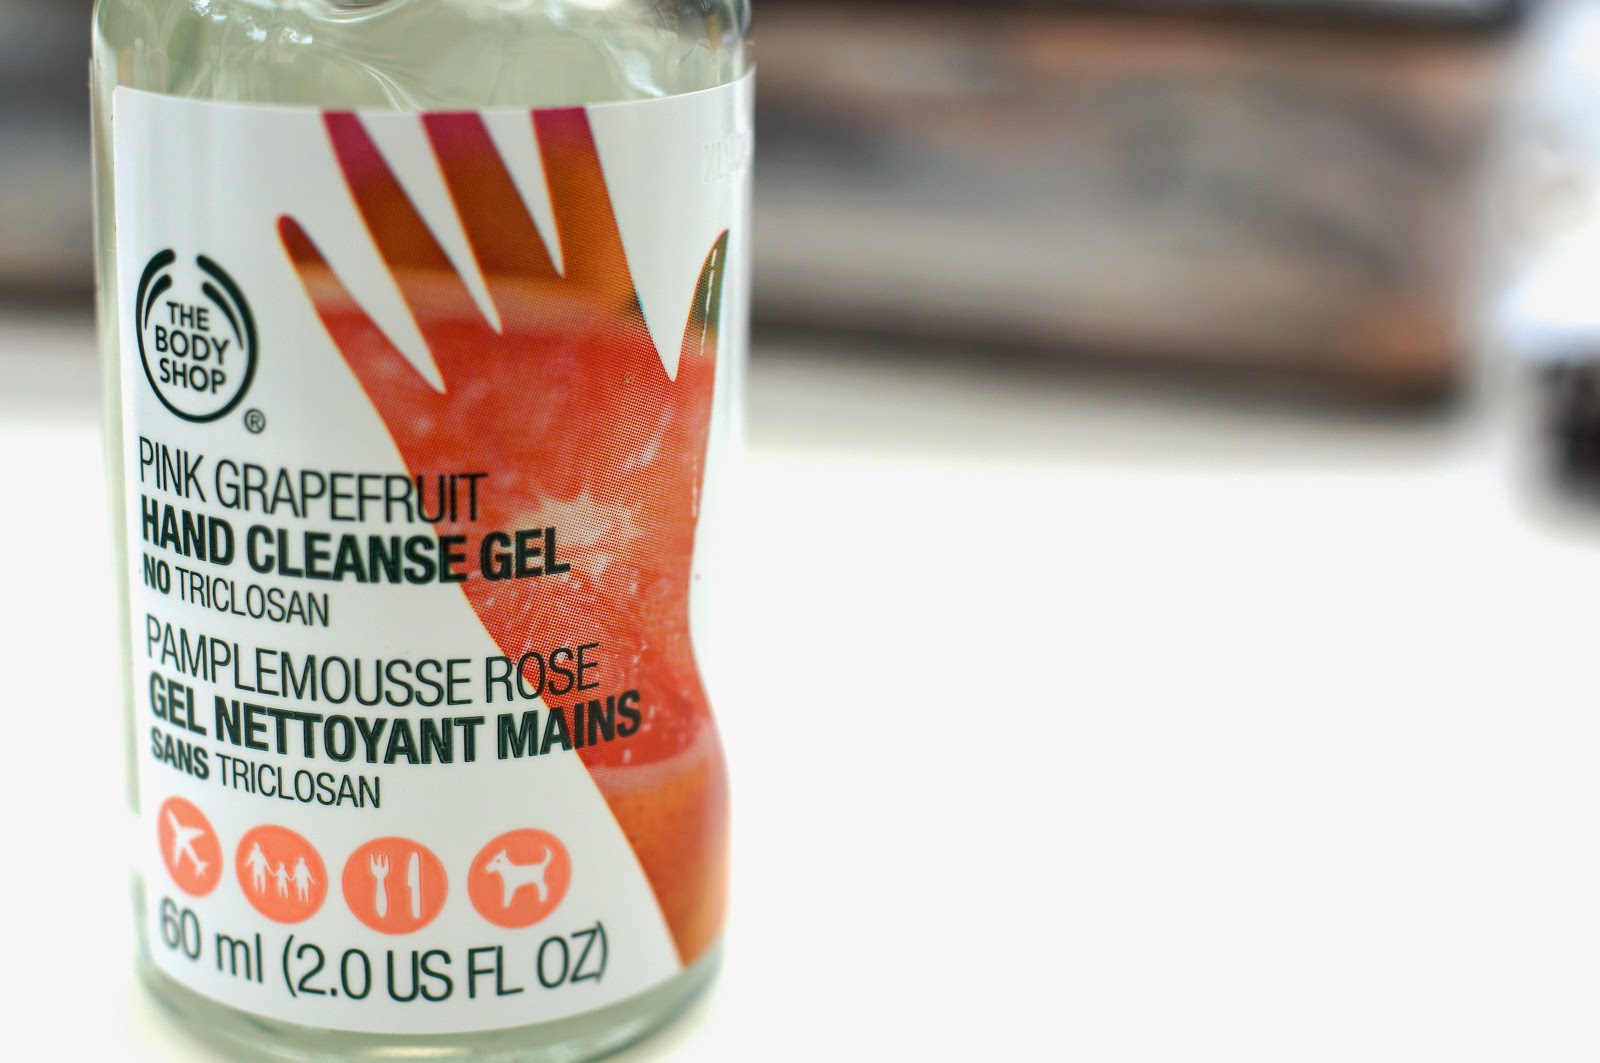 the body shop pink grapefruit hand cleanse gel